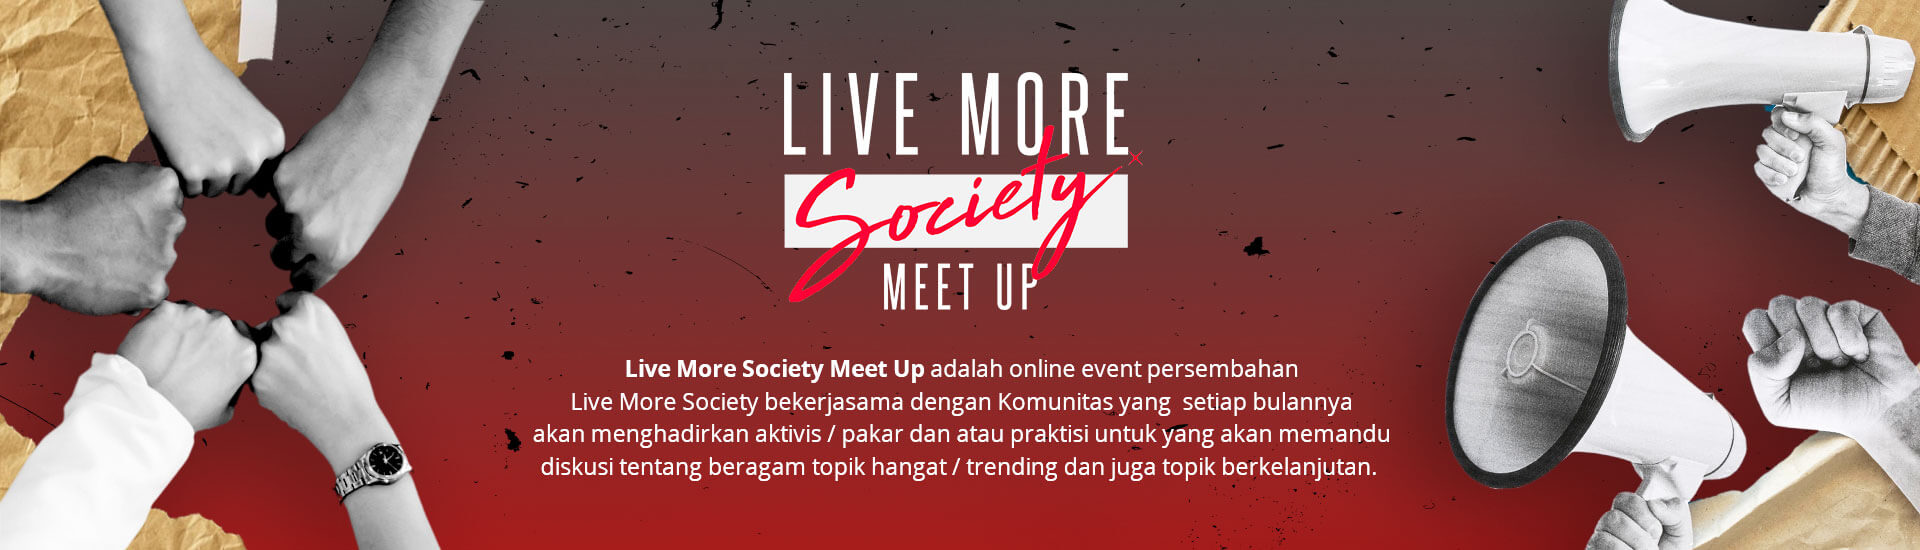 Live More Society Meet Up